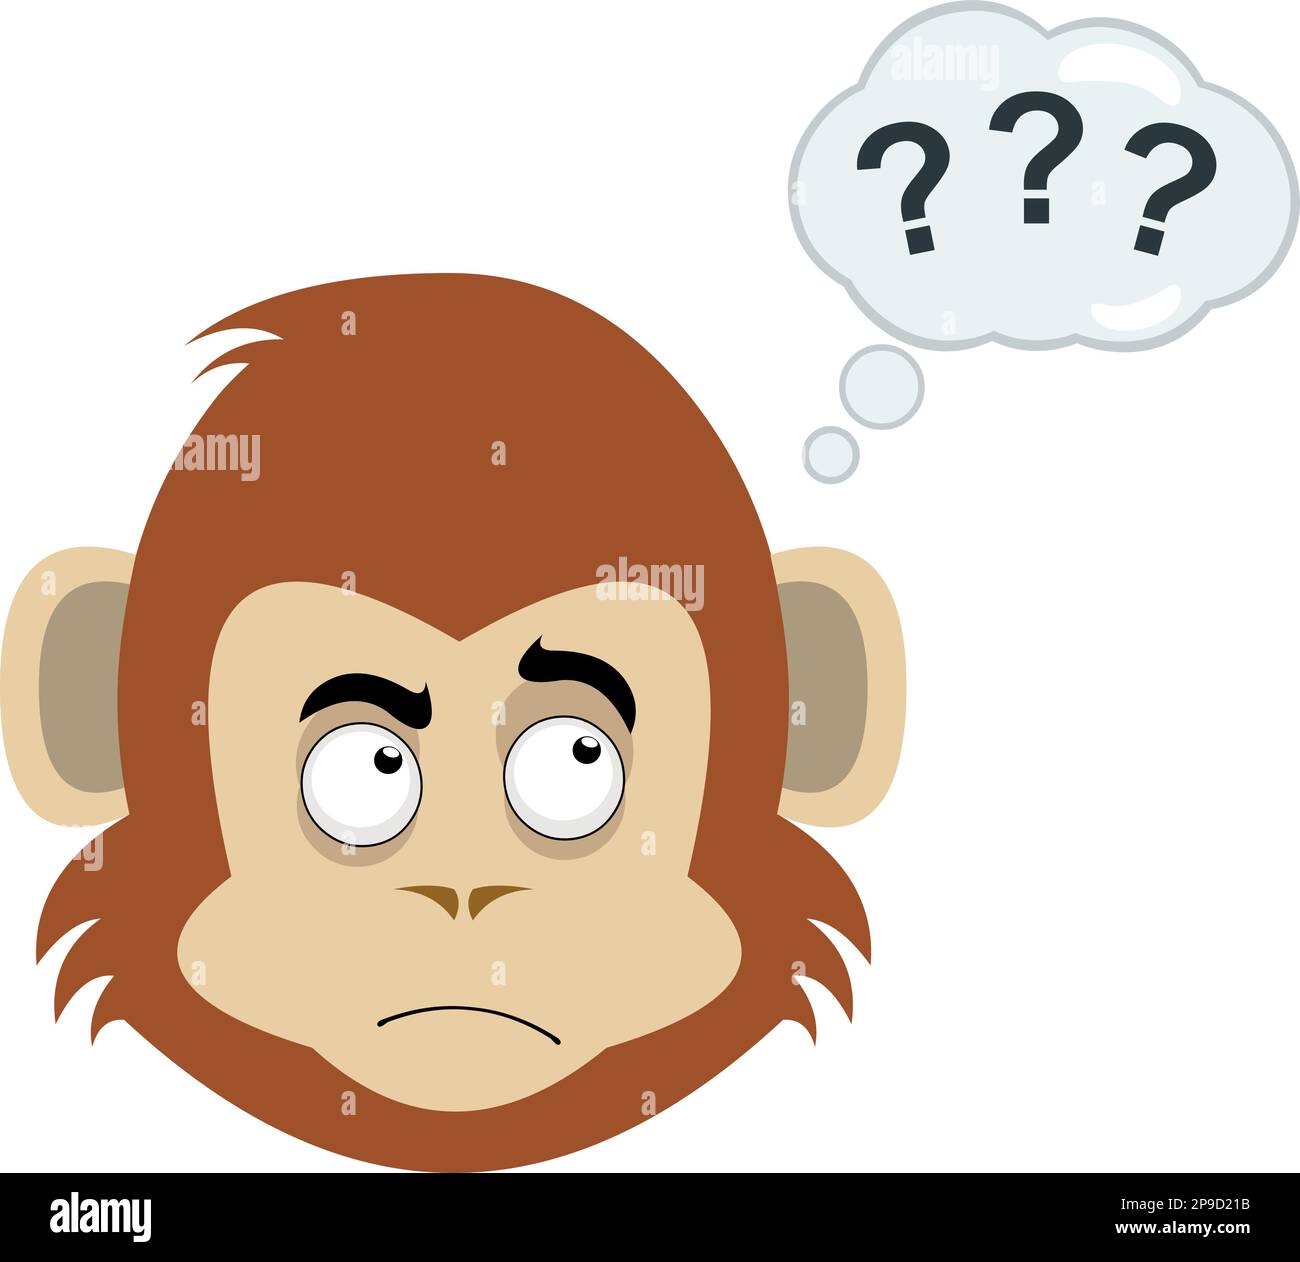 vector illustration face of a cartoon monkey with a thinking expression or doubt, with a cloud of thinking with question marks Stock Vector